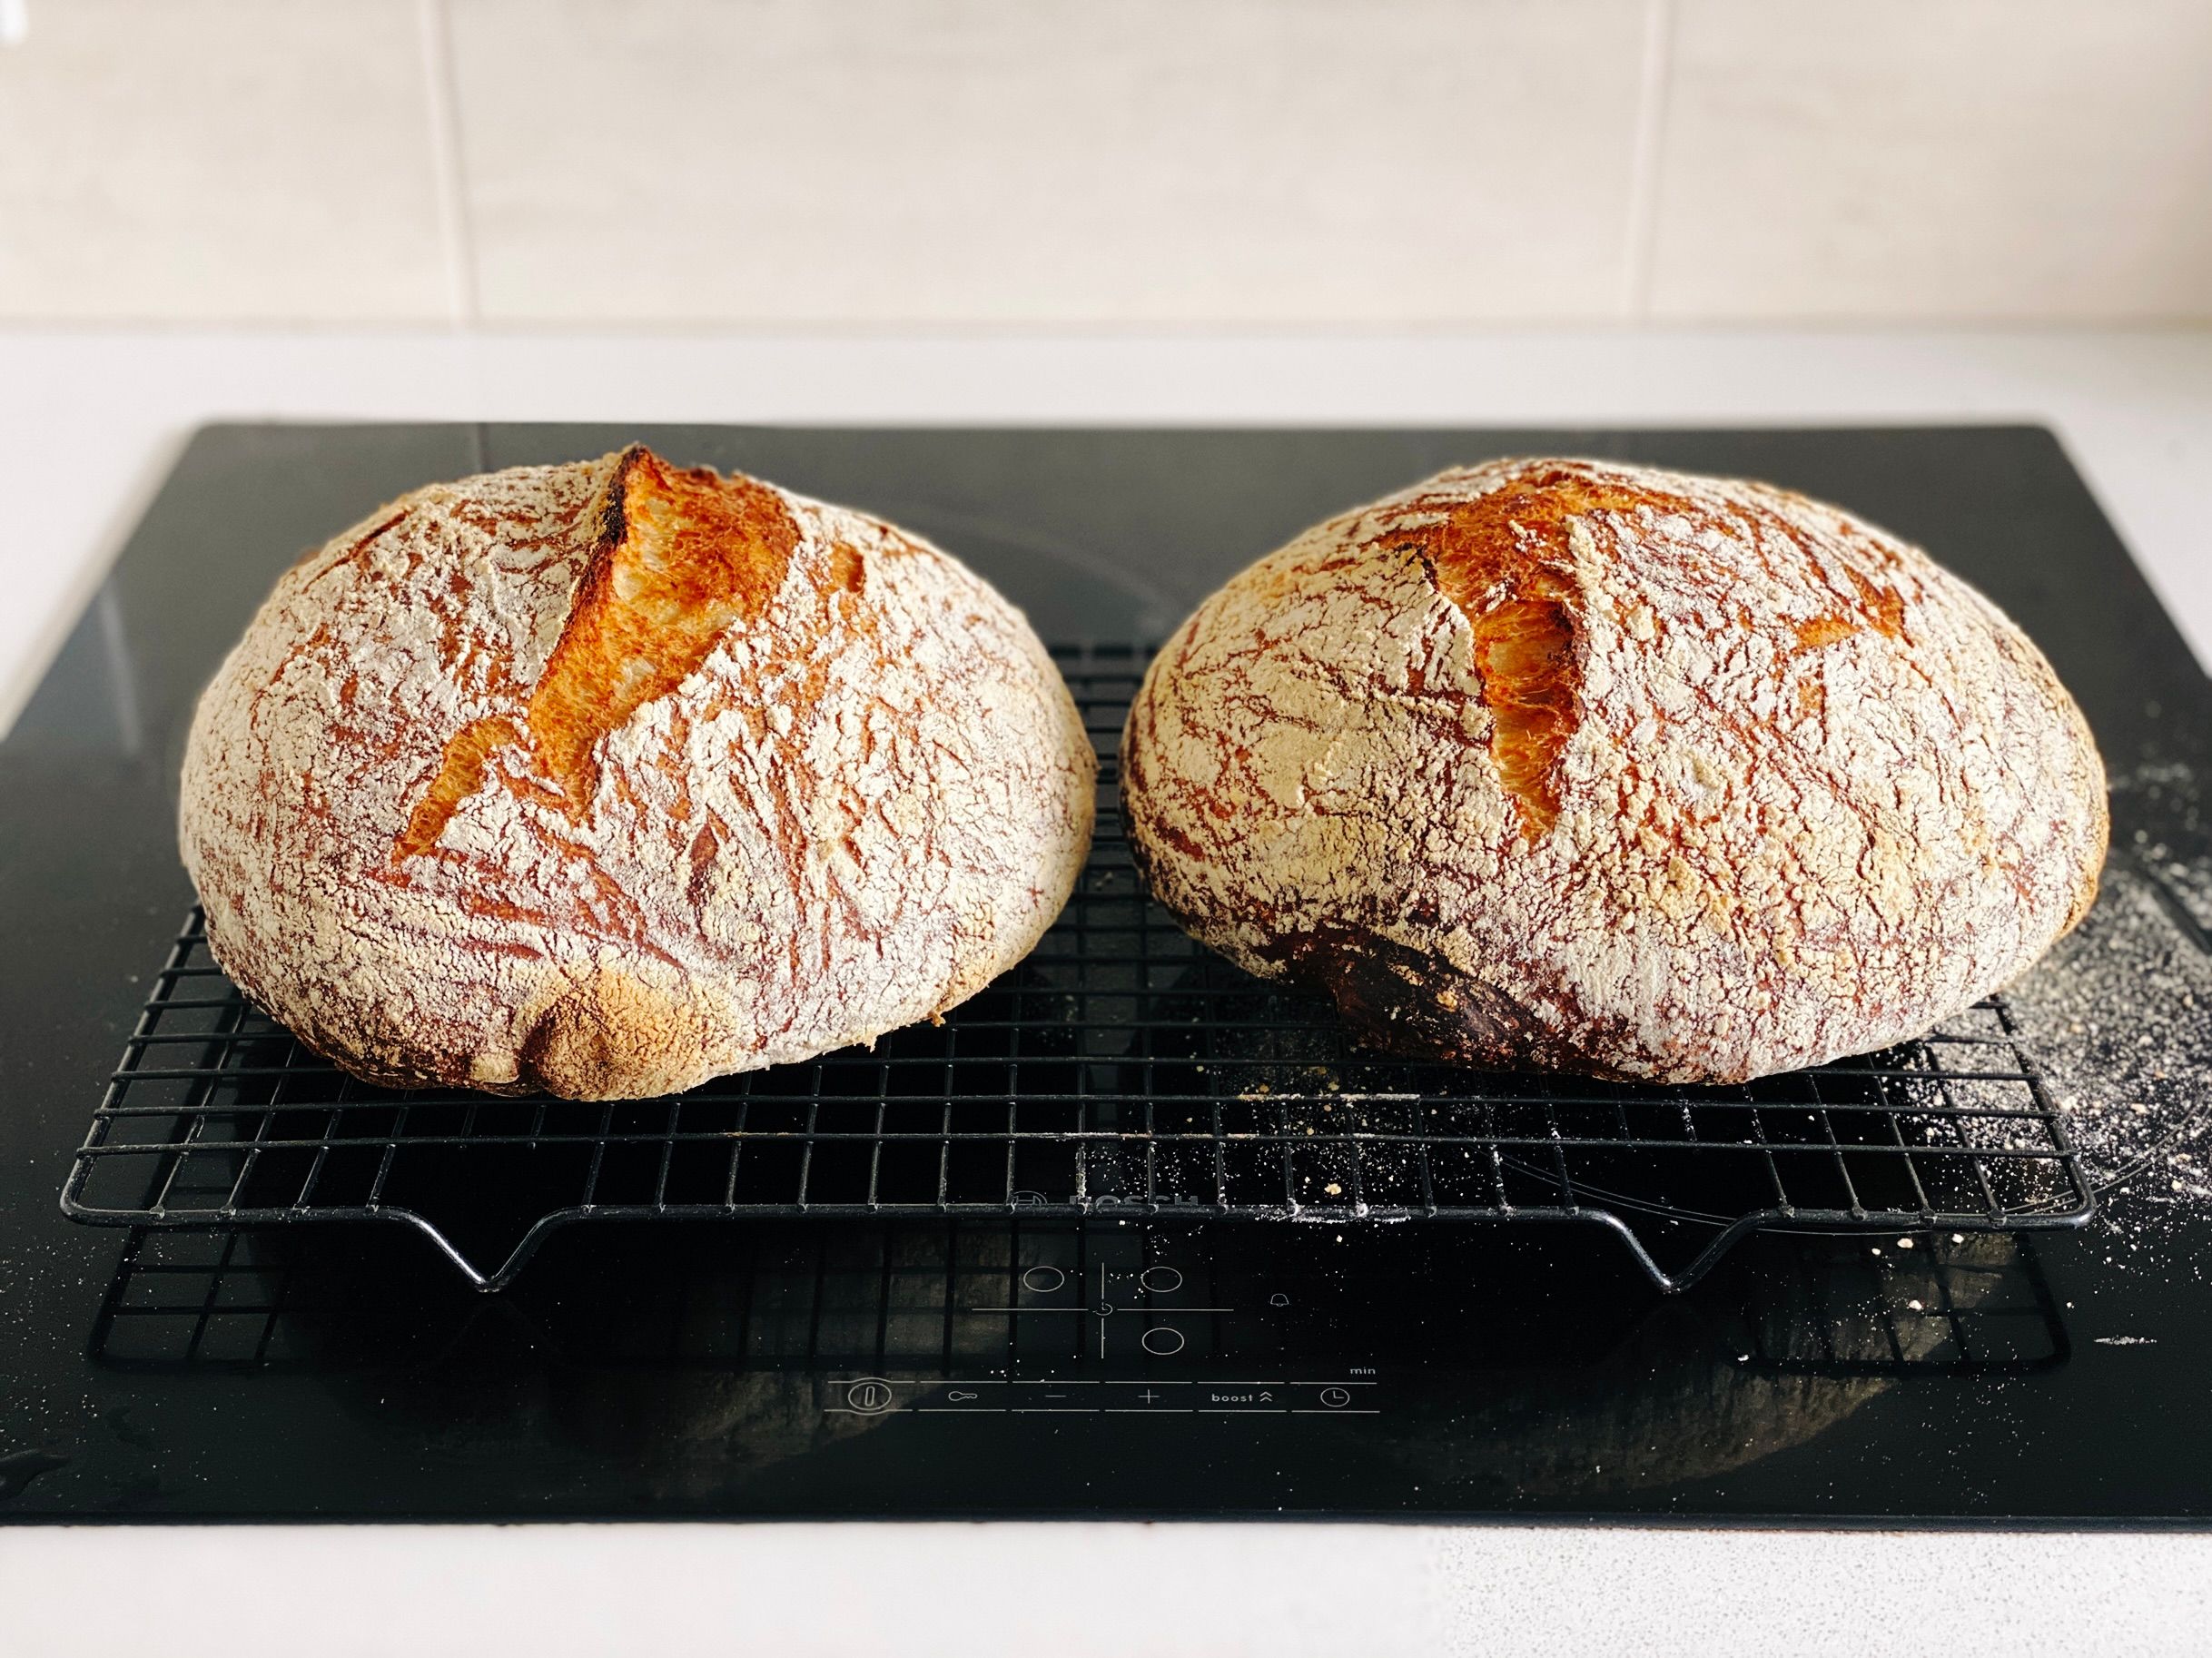 A photo of two round golden-brown loaves of bread sitting on a cooling rack.